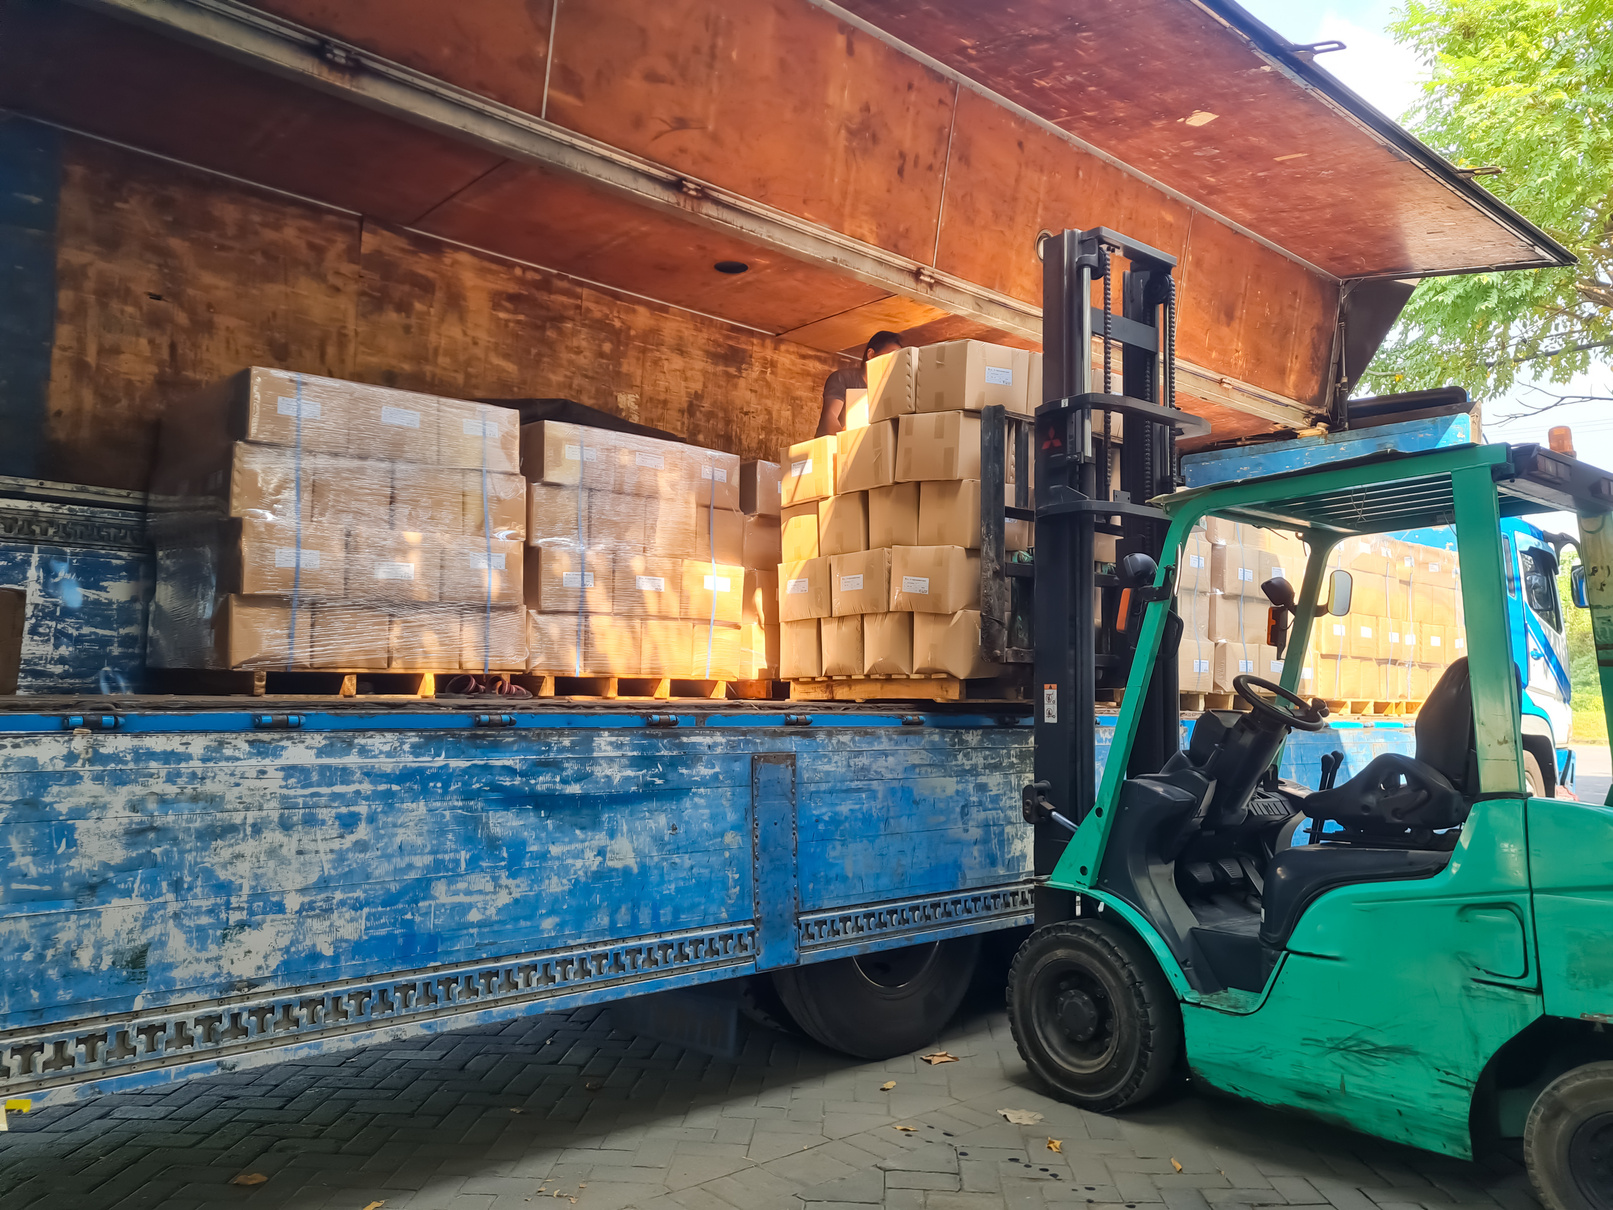 Forklifts lift products in cartons arranged on pallets to deliver them by truck